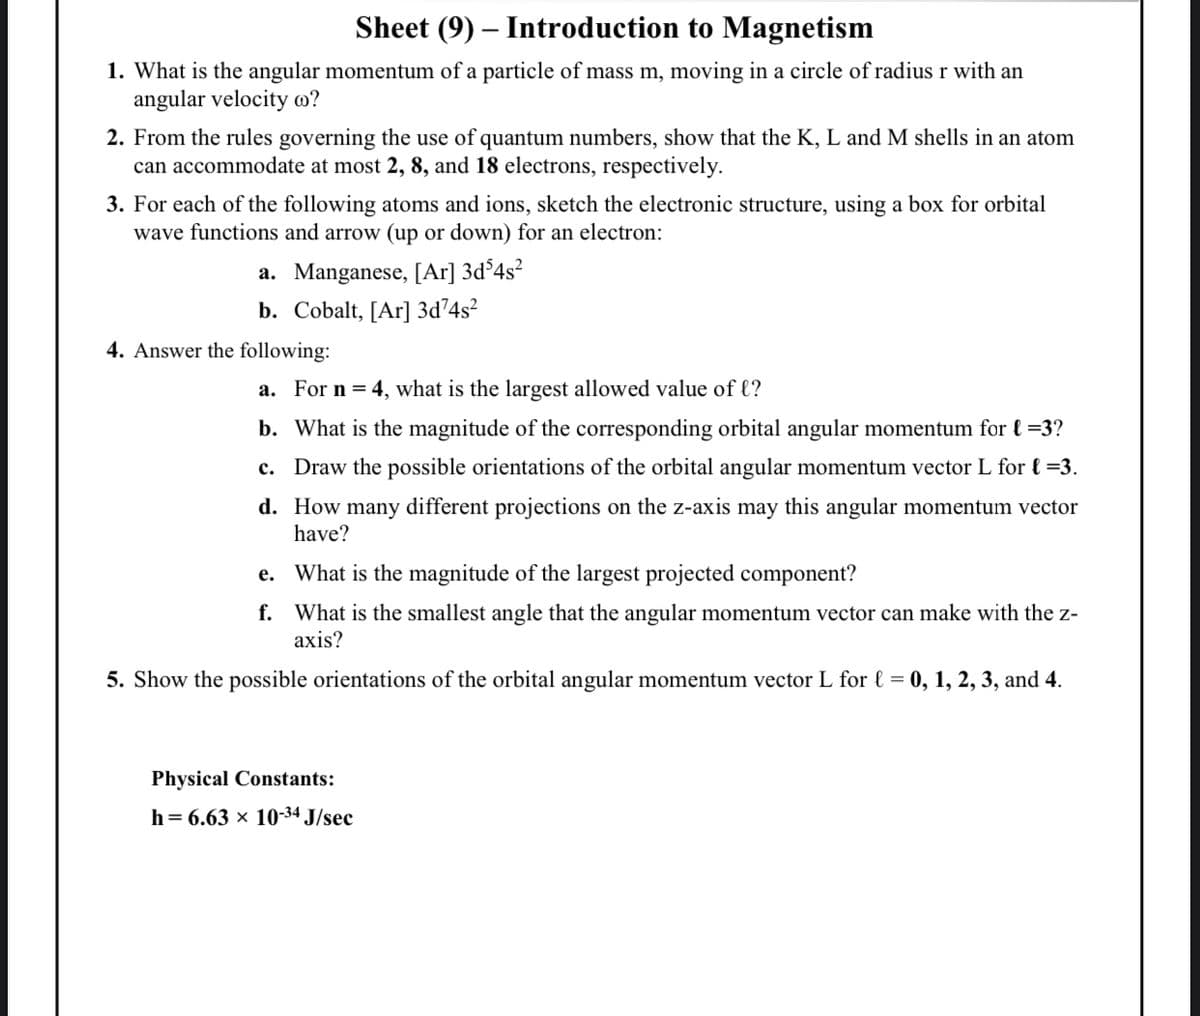 Sheet (9) – Introduction to Magnetism
1. What is the angular momentum of a particle of mass m, moving in a circle of radius r with an
angular velocity o?
2. From the rules governing the use of quantum numbers, show that the K, L and M shells in an atom
can accommodate at most 2, 8, and 18 electrons, respectively.
3. For each of the following atoms and ions, sketch the electronic structure, using a box for orbital
wave functions and arrow (up or down) for an electron:
a. Manganese, [Ar] 3d°4s²
b. Cobalt, [Ar] 3d²4s?
4. Answer the following:
a. For n = 4, what is the largest allowed value of €?
b. What is the magnitude of the corresponding orbital angular momentum for { =3?
c. Draw the possible orientations of the orbital angular momentum vector L for { =3.
d. How many different projections on the z-axis may this angular momentum vector
have?
e. What is the magnitude of the largest projected component?
f. What is the smallest angle that the angular momentum vector can make with the z-
axis?
5. Show the possible orientations of the orbital angular momentum vector L for { = 0, 1, 2, 3, and 4.
Physical Constants:
h= 6.63 × 10-34 J/sec
